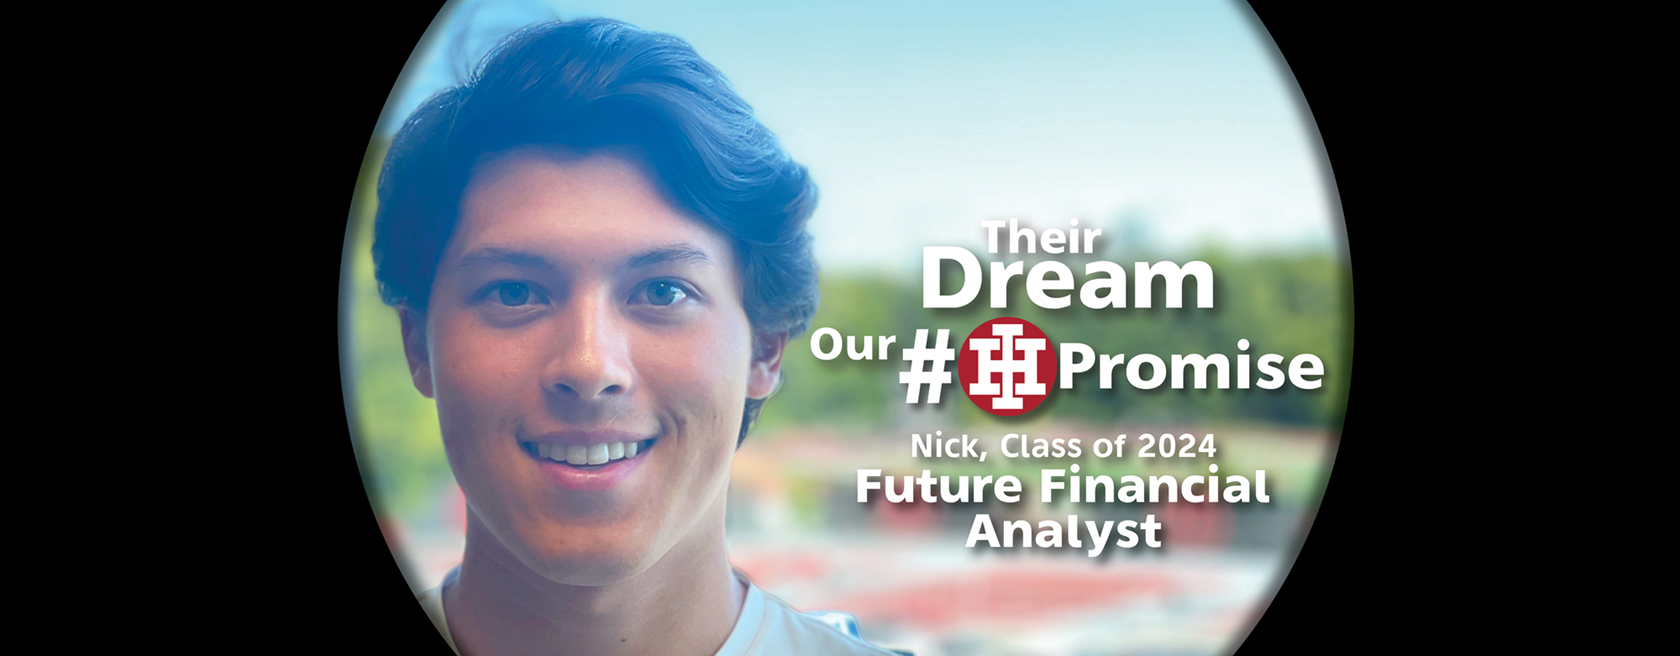 Their Dream Our Promise - Nick, Class of 2024, Future Financial Analyst